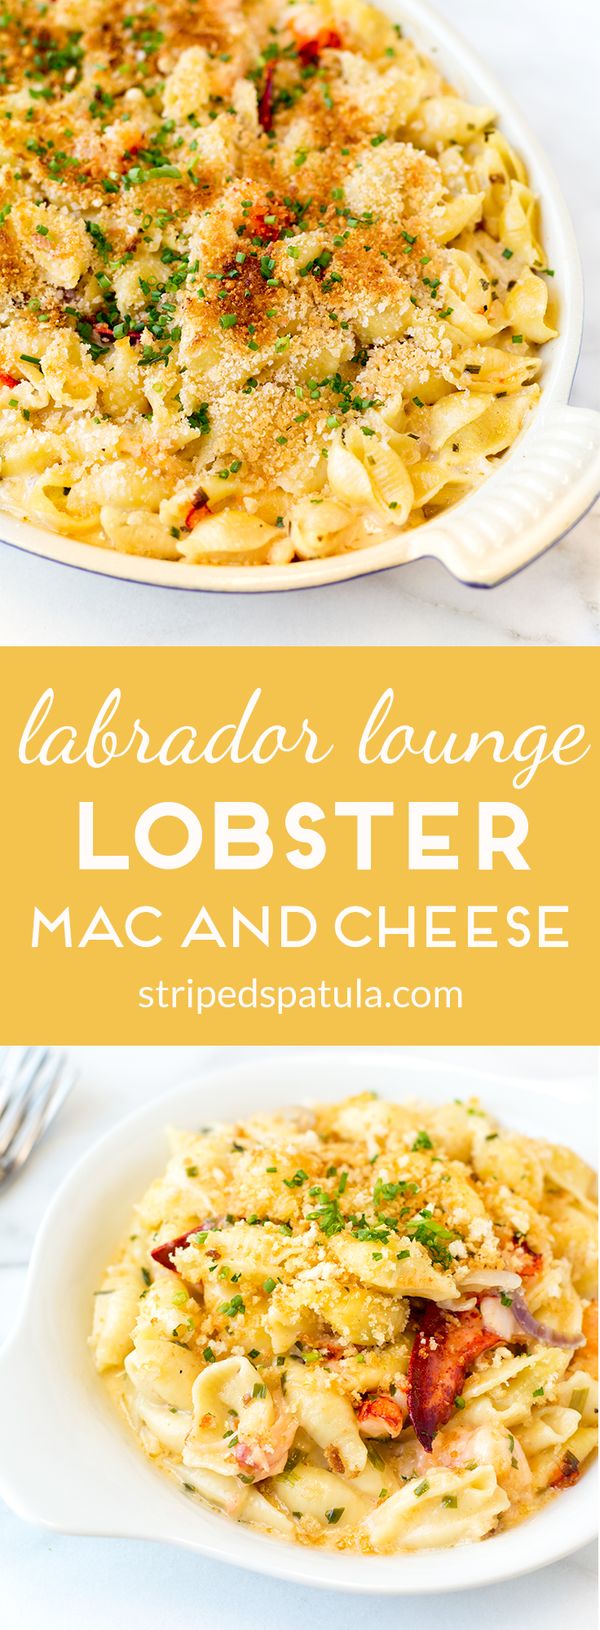 Labrador Lounge Lobster Mac and Cheese